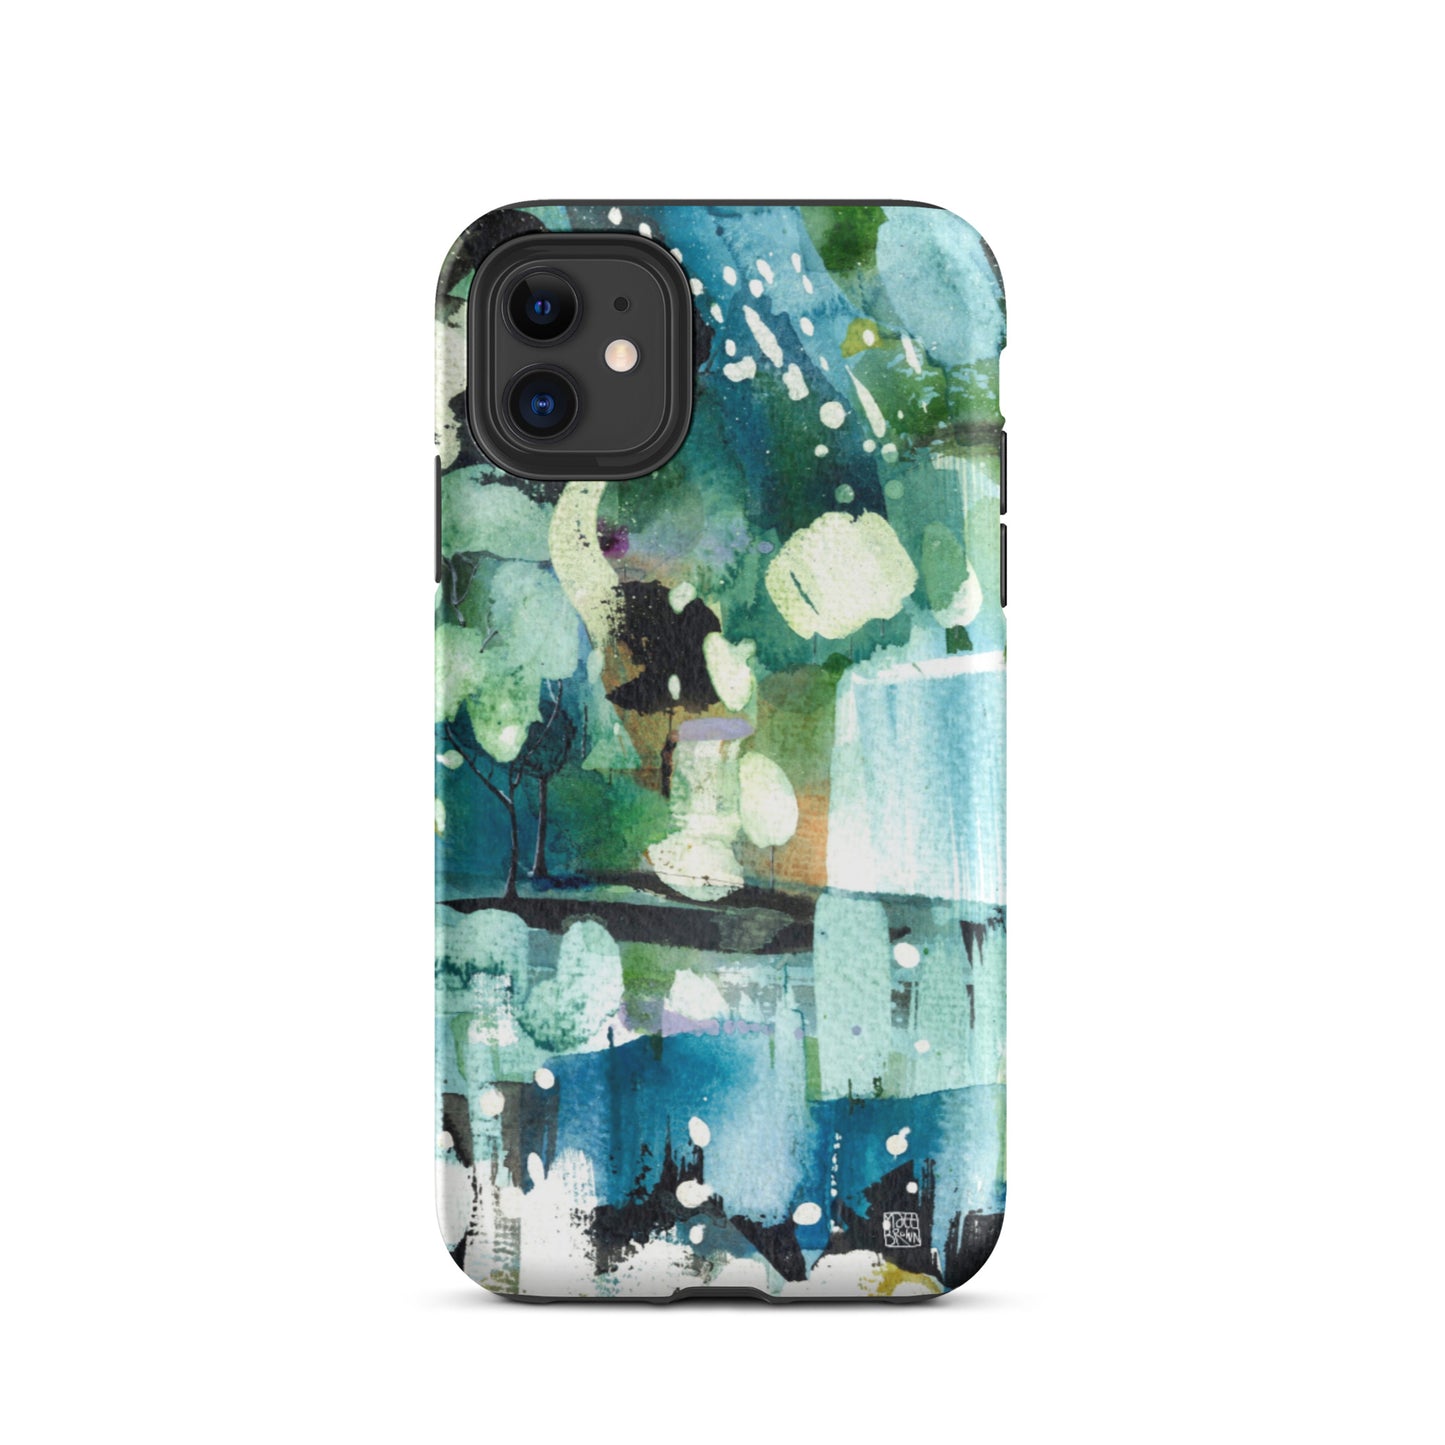 Tough iPhone Art Case - Waterfall in the Forest